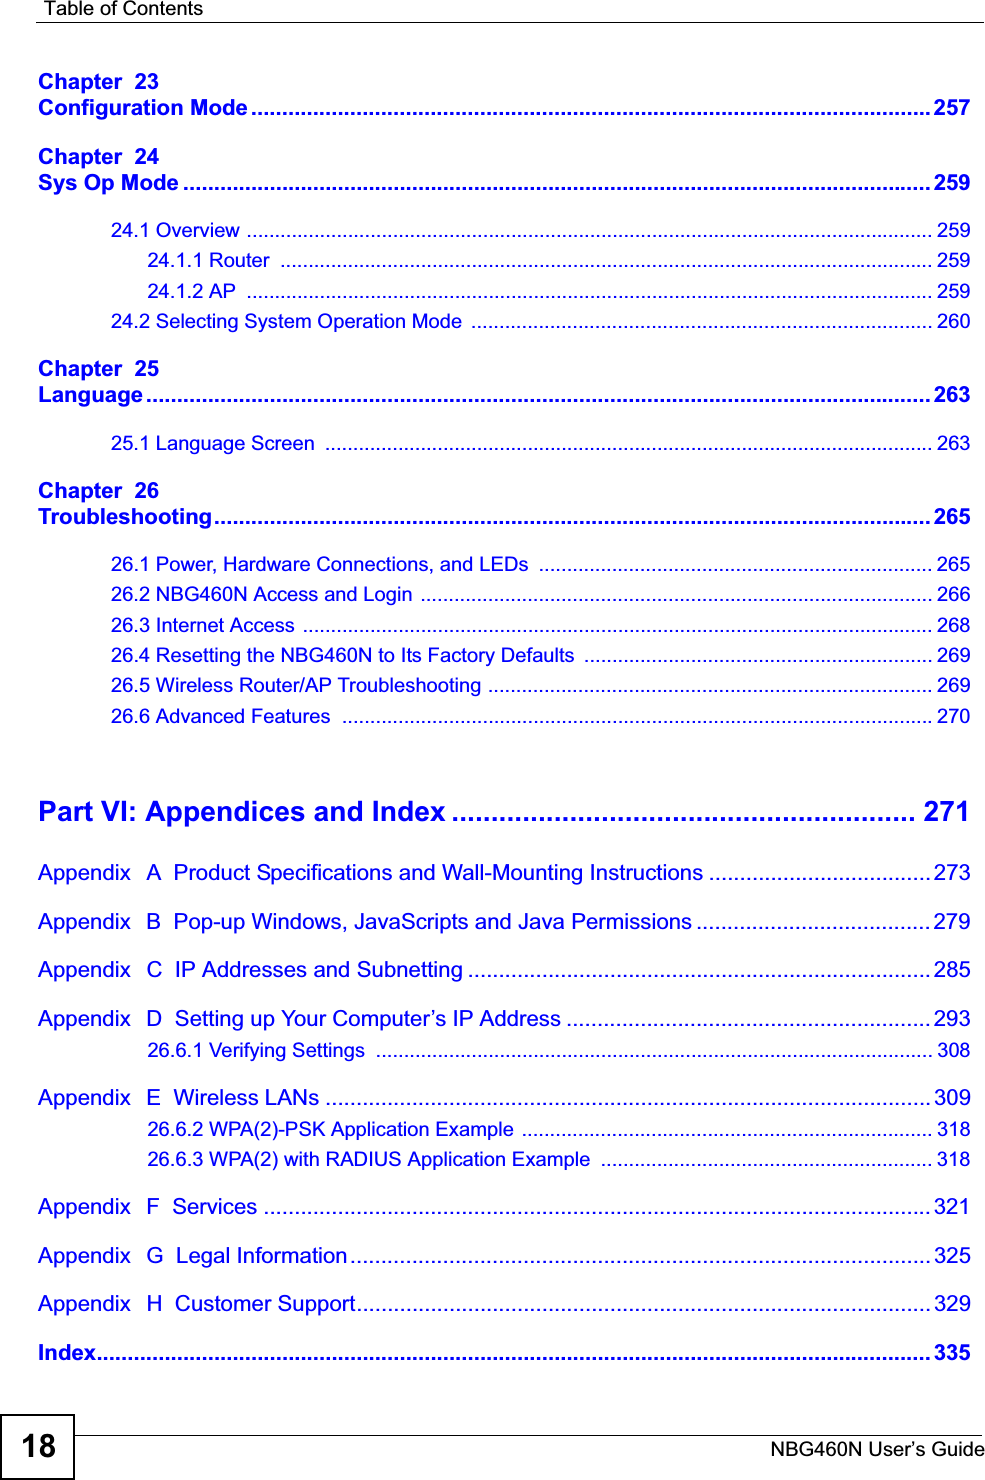 Table of ContentsNBG460N User’s Guide18Chapter  23Configuration Mode..............................................................................................................257Chapter  24Sys Op Mode ......................................................................................................................... 25924.1 Overview .......................................................................................................................... 25924.1.1 Router  .................................................................................................................... 25924.1.2 AP  .......................................................................................................................... 25924.2 Selecting System Operation Mode  .................................................................................. 260Chapter  25Language ............................................................................................................................... 26325.1 Language Screen  ............................................................................................................ 263Chapter  26Troubleshooting.................................................................................................................... 26526.1 Power, Hardware Connections, and LEDs  ...................................................................... 26526.2 NBG460N Access and Login  ........................................................................................... 26626.3 Internet Access ................................................................................................................ 26826.4 Resetting the NBG460N to Its Factory Defaults  .............................................................. 26926.5 Wireless Router/AP Troubleshooting ............................................................................... 26926.6 Advanced Features  .........................................................................................................270Part VI: Appendices and Index ........................................................... 271Appendix   A  Product Specifications and Wall-Mounting Instructions .................................... 273Appendix   B  Pop-up Windows, JavaScripts and Java Permissions ...................................... 279Appendix   C  IP Addresses and Subnetting ........................................................................... 285Appendix   D  Setting up Your Computer’s IP Address ...........................................................29326.6.1 Verifying Settings  ................................................................................................... 308Appendix   E  Wireless LANs ..................................................................................................30926.6.2 WPA(2)-PSK Application Example ......................................................................... 31826.6.3 WPA(2) with RADIUS Application Example  ........................................................... 318Appendix   F  Services ............................................................................................................ 321Appendix   G  Legal Information.............................................................................................. 325Appendix   H  Customer Support............................................................................................. 329Index....................................................................................................................................... 335